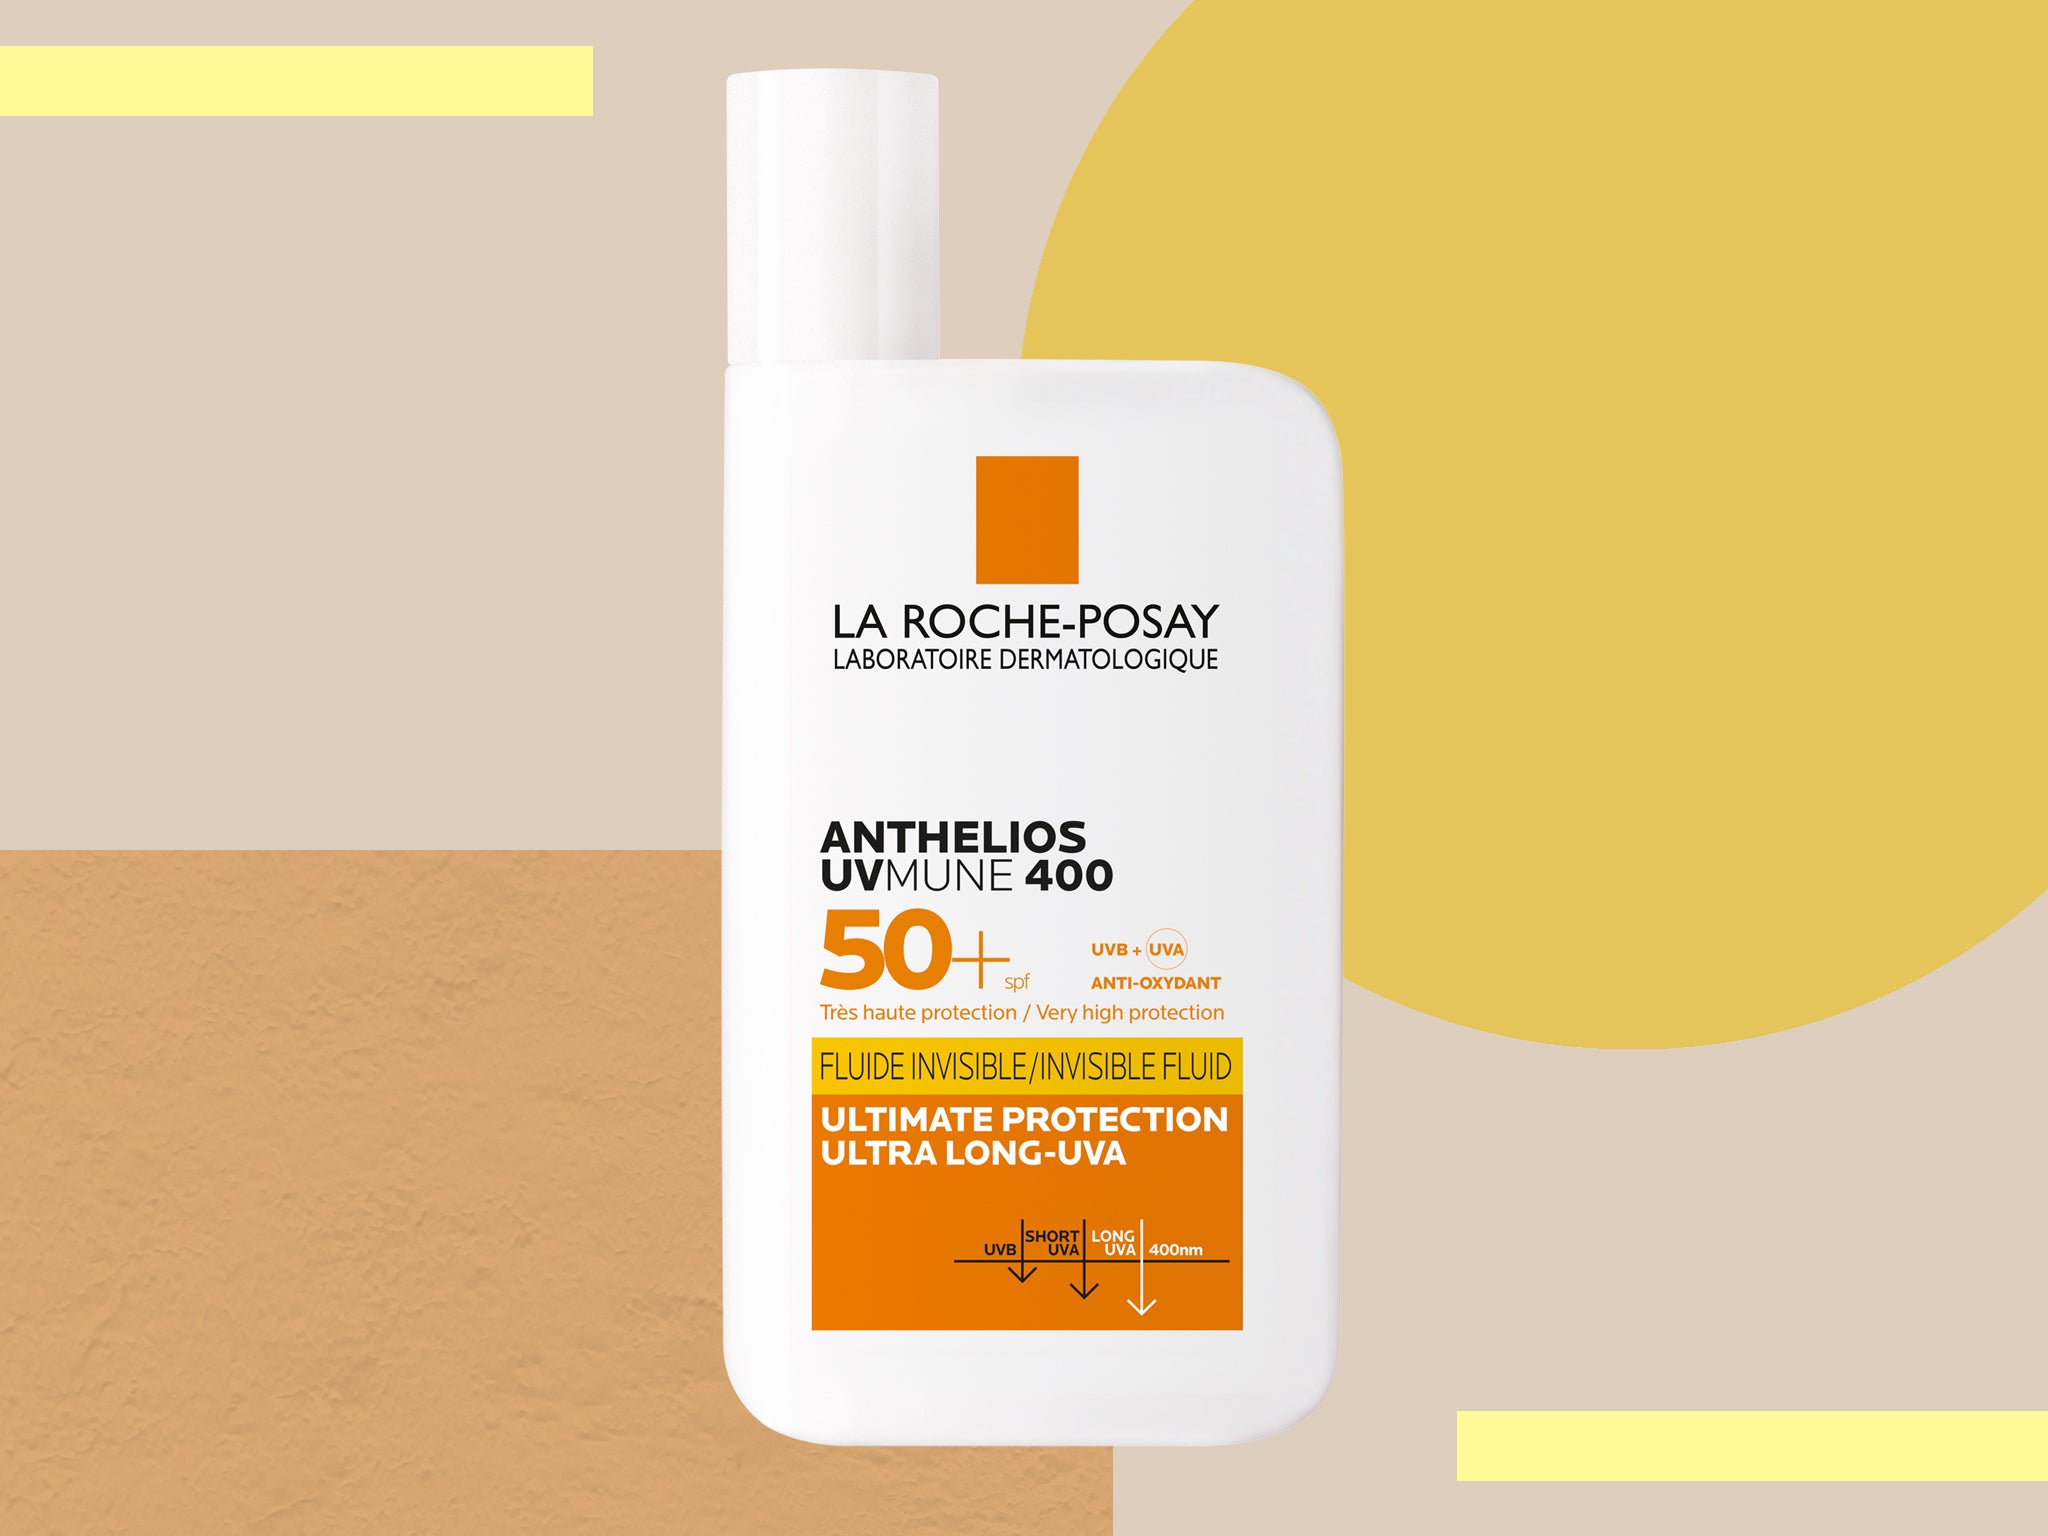 La Roche Posay anthelois sunscreen review: Is the new formula just as good? The Independent